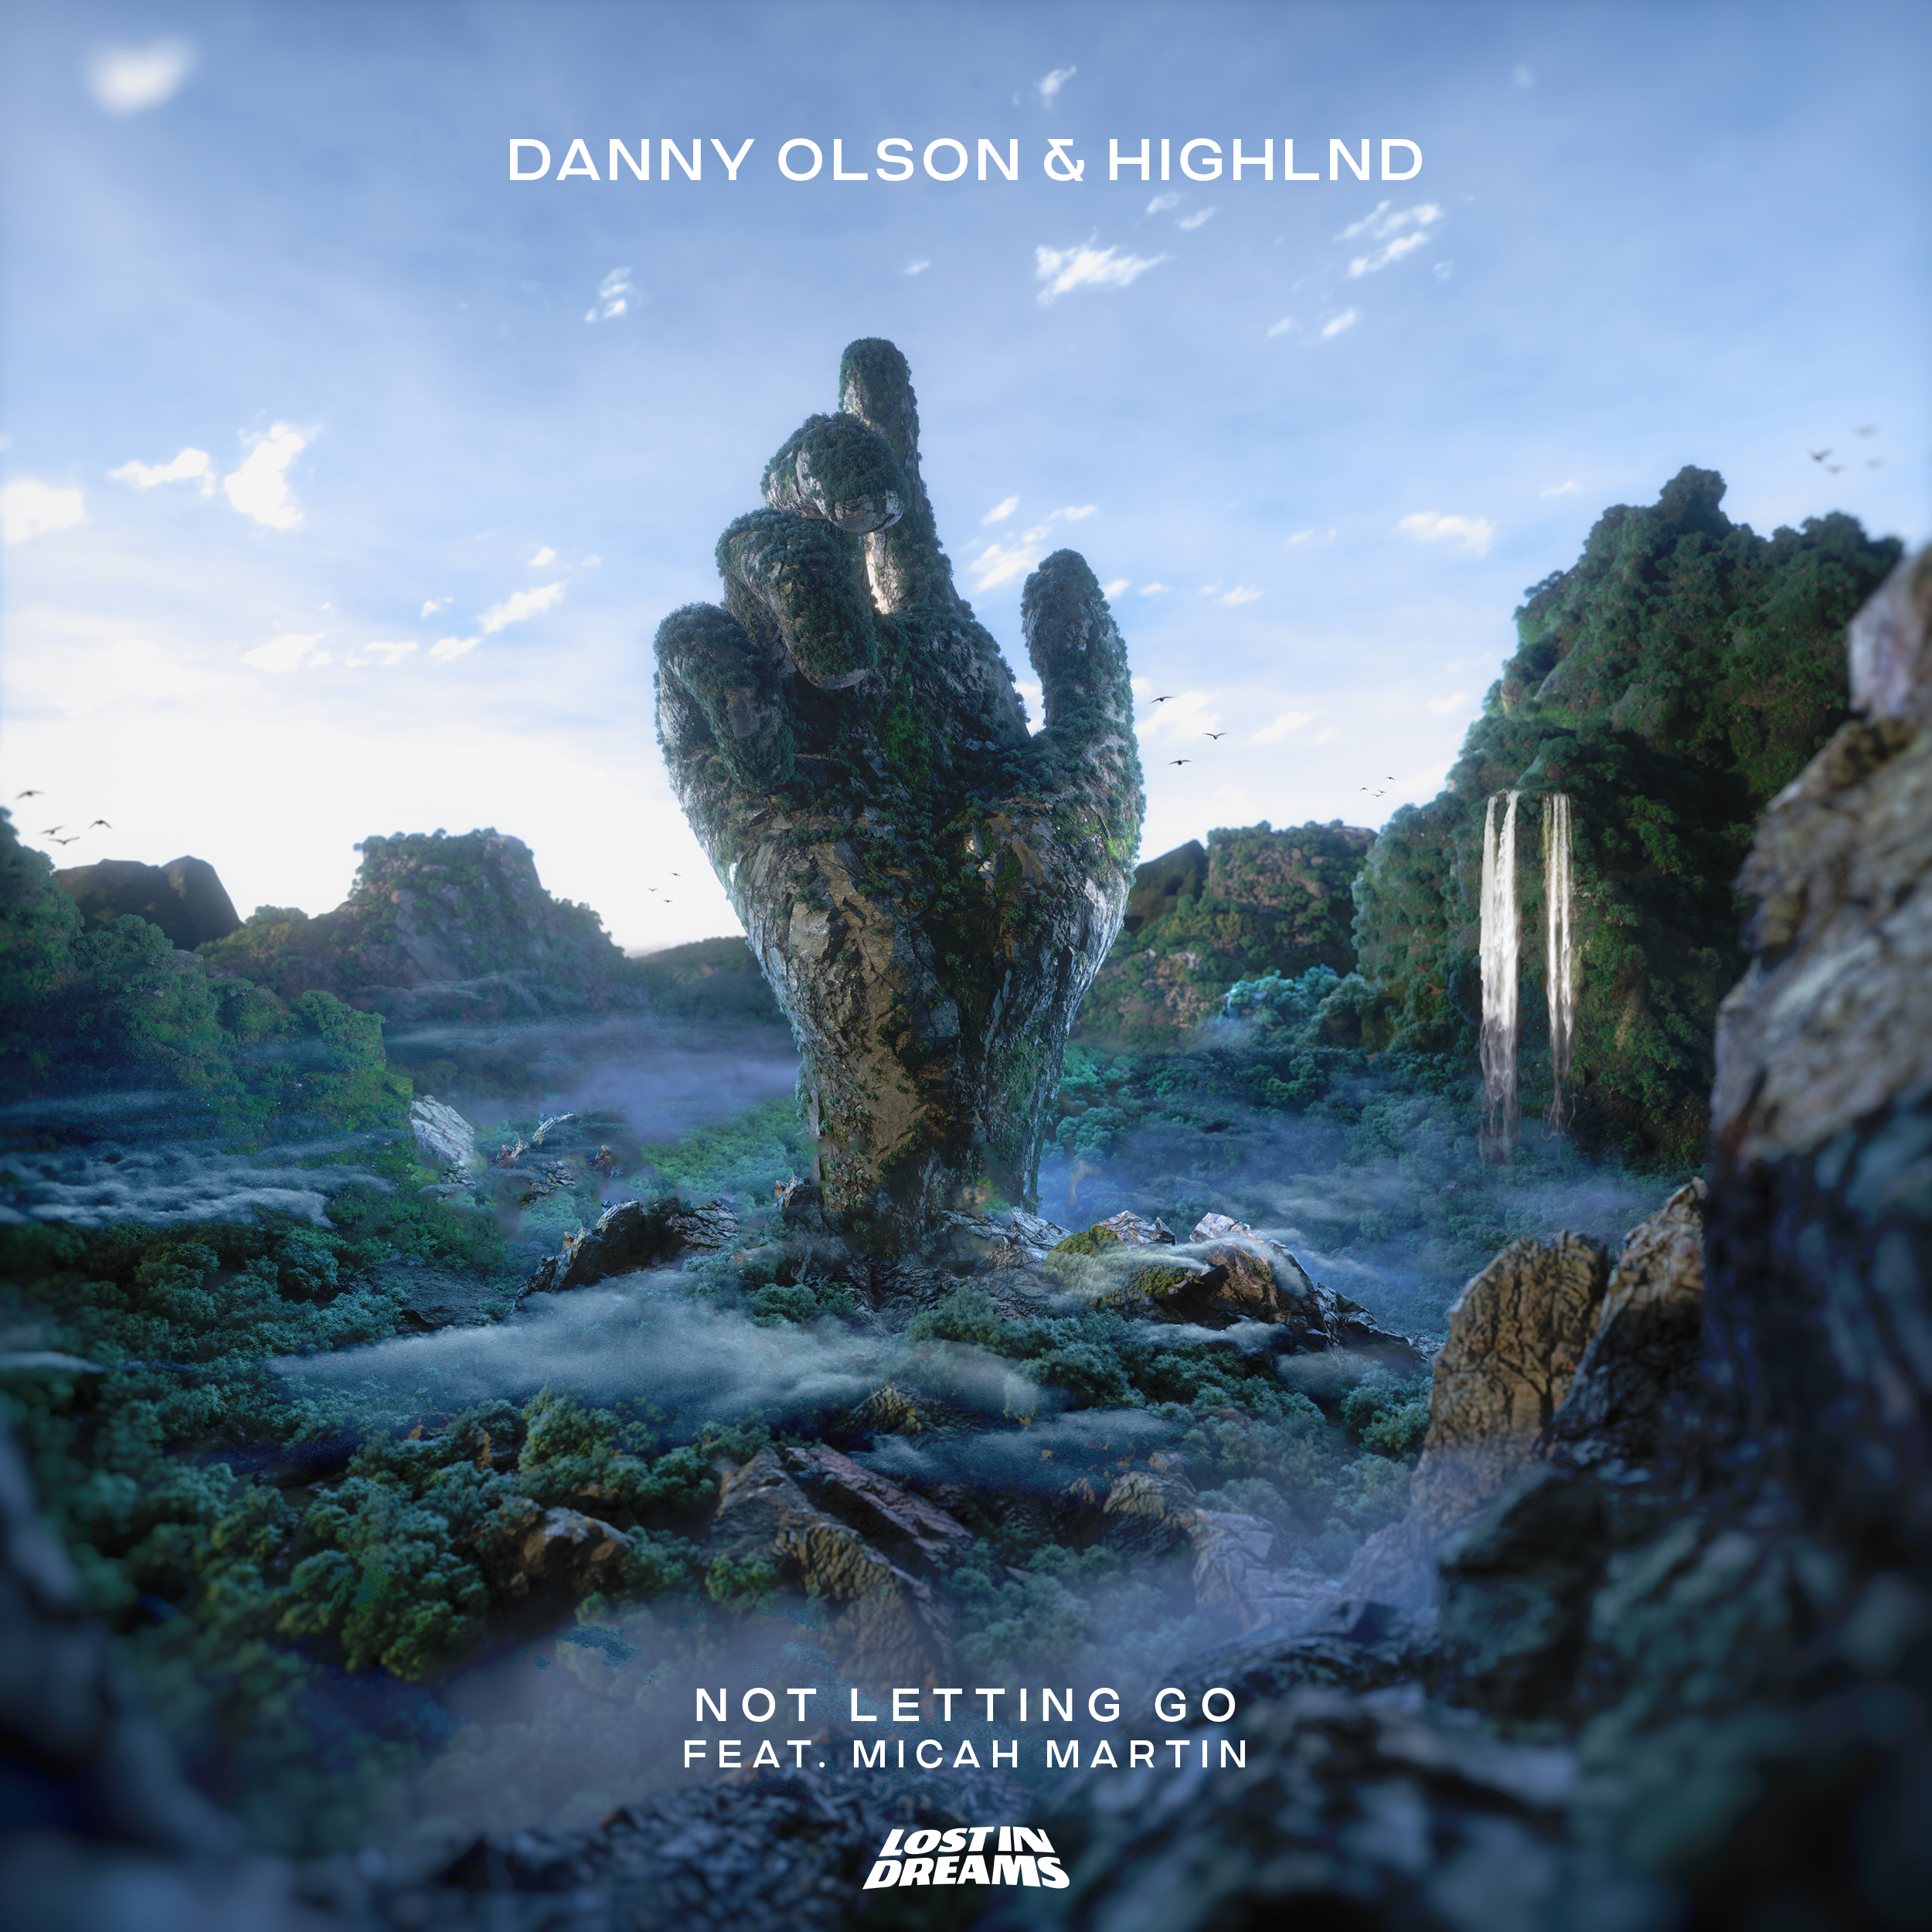 Danny Olson And Higlhnd Release ‘Not Letting Go,’ On Insomniac Label Lost In Dreams